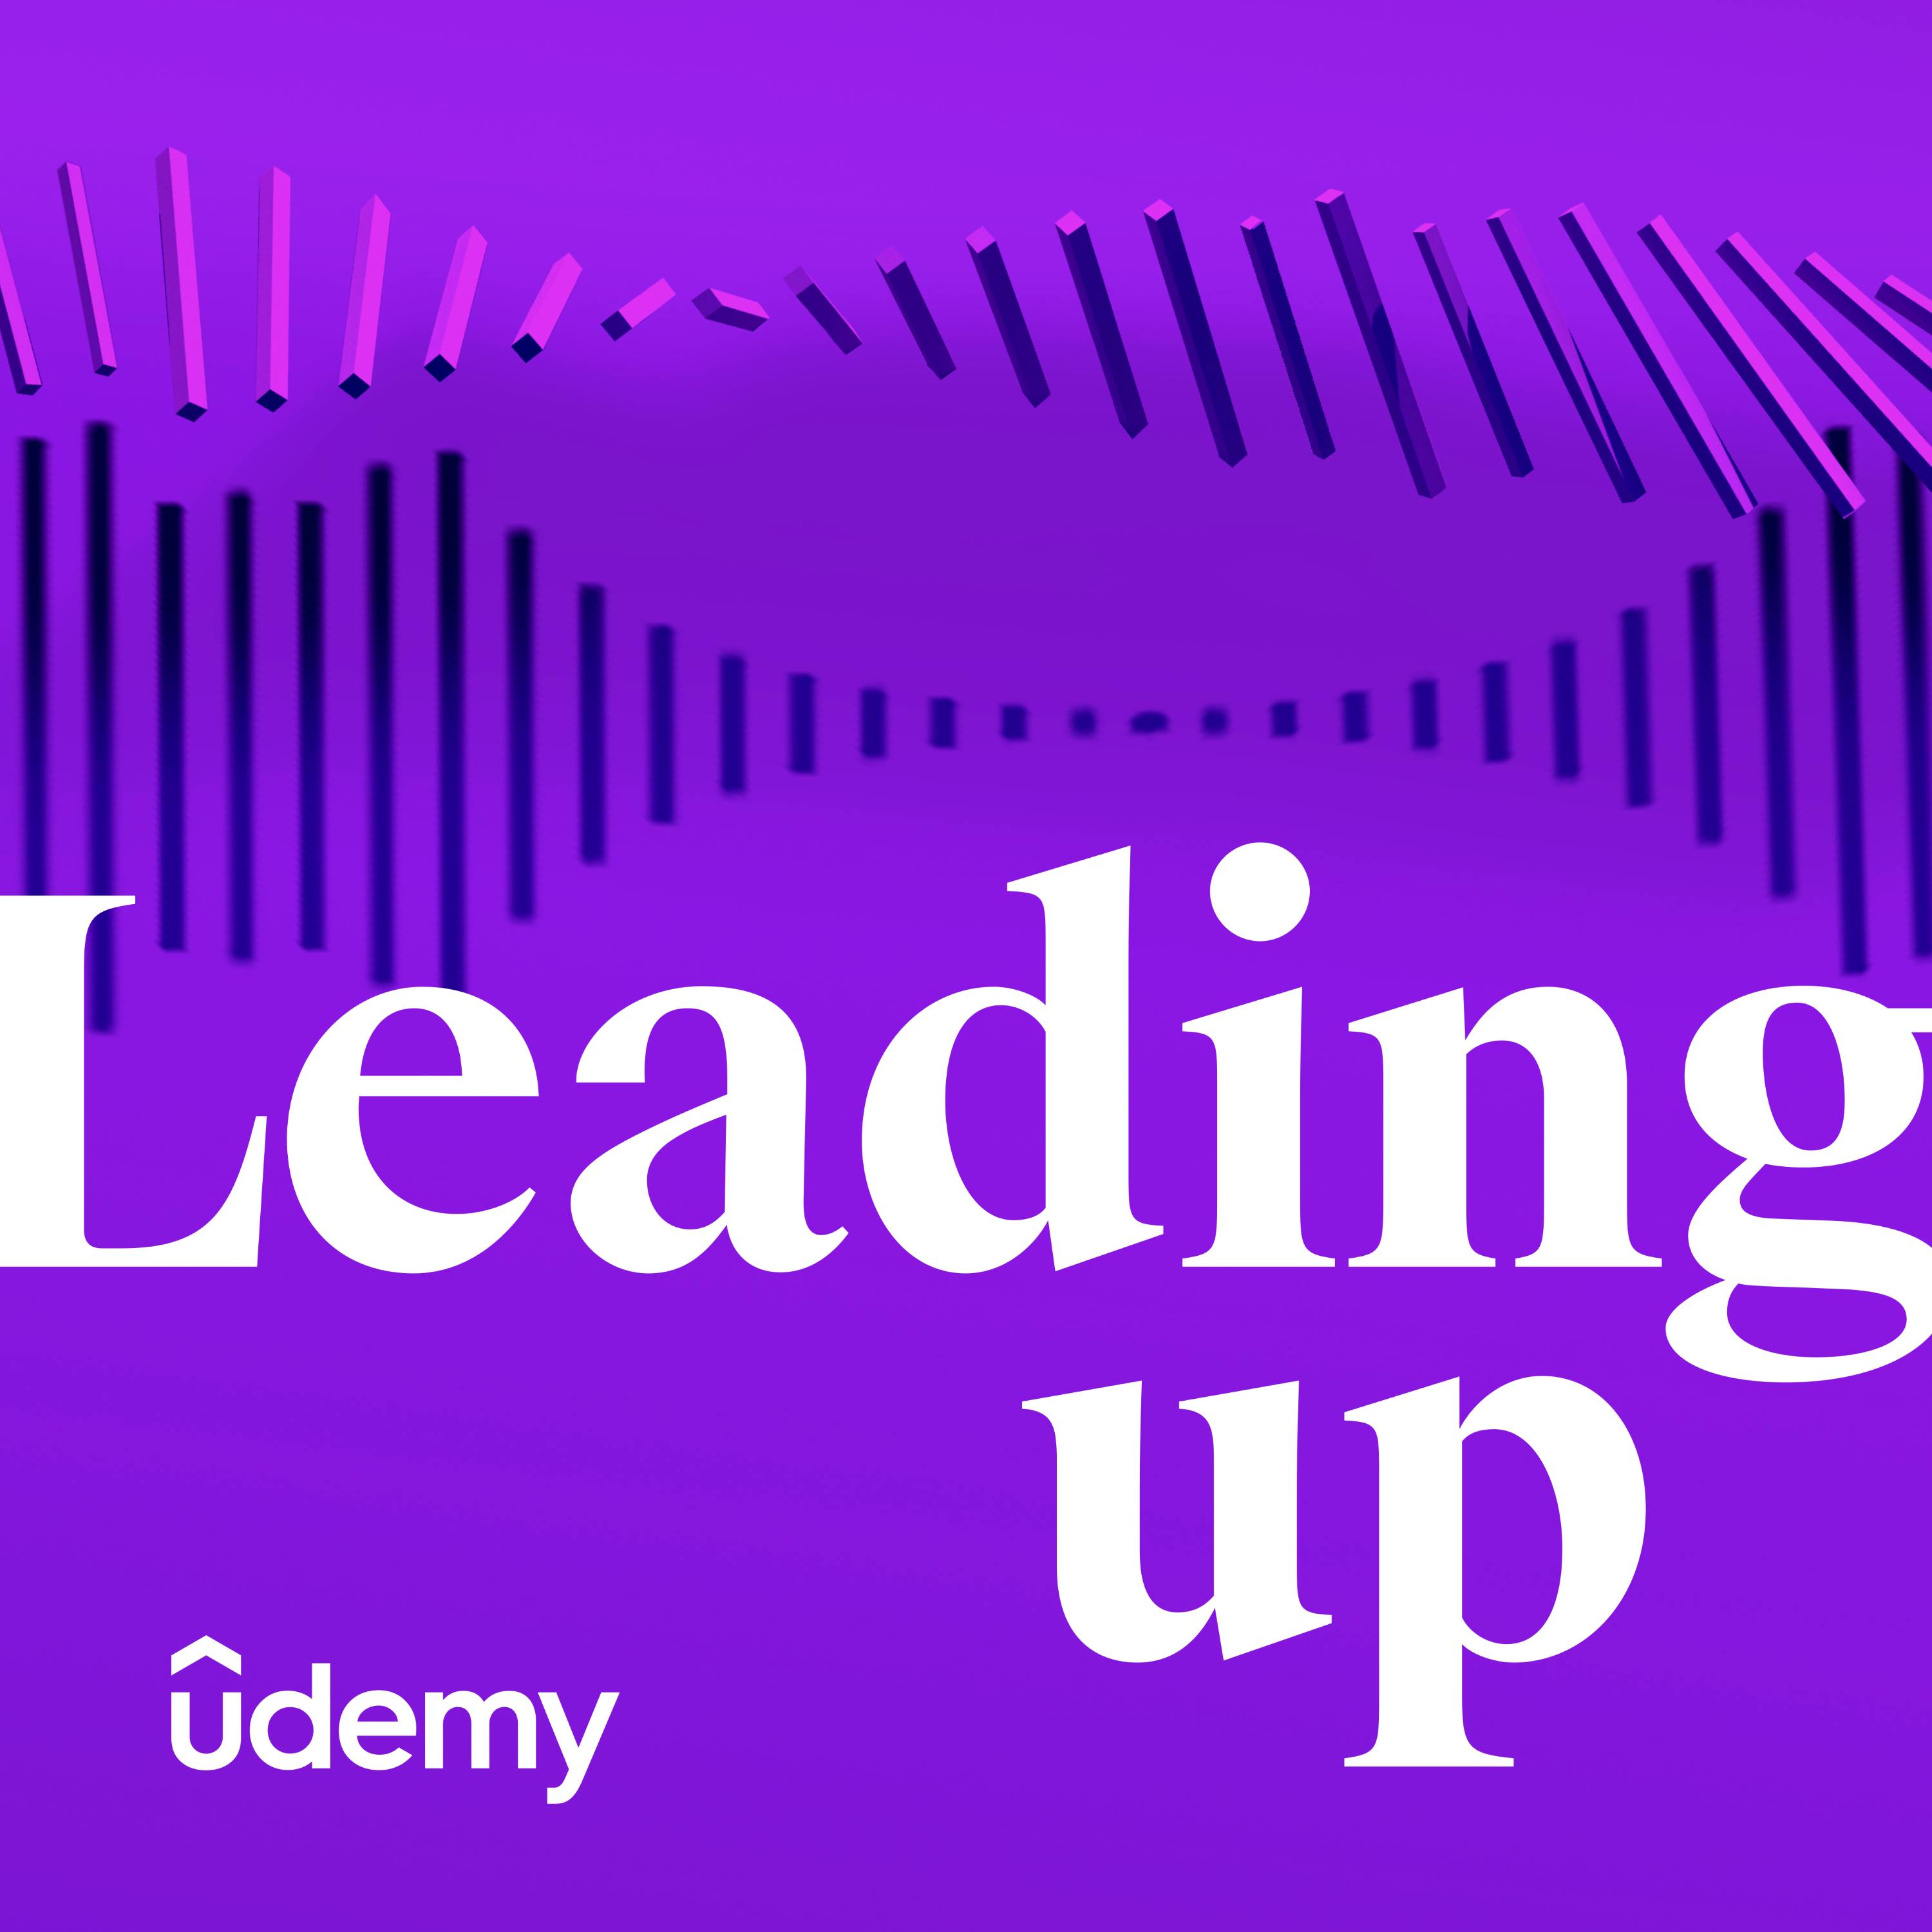 Introducing: Leading Up by Udemy